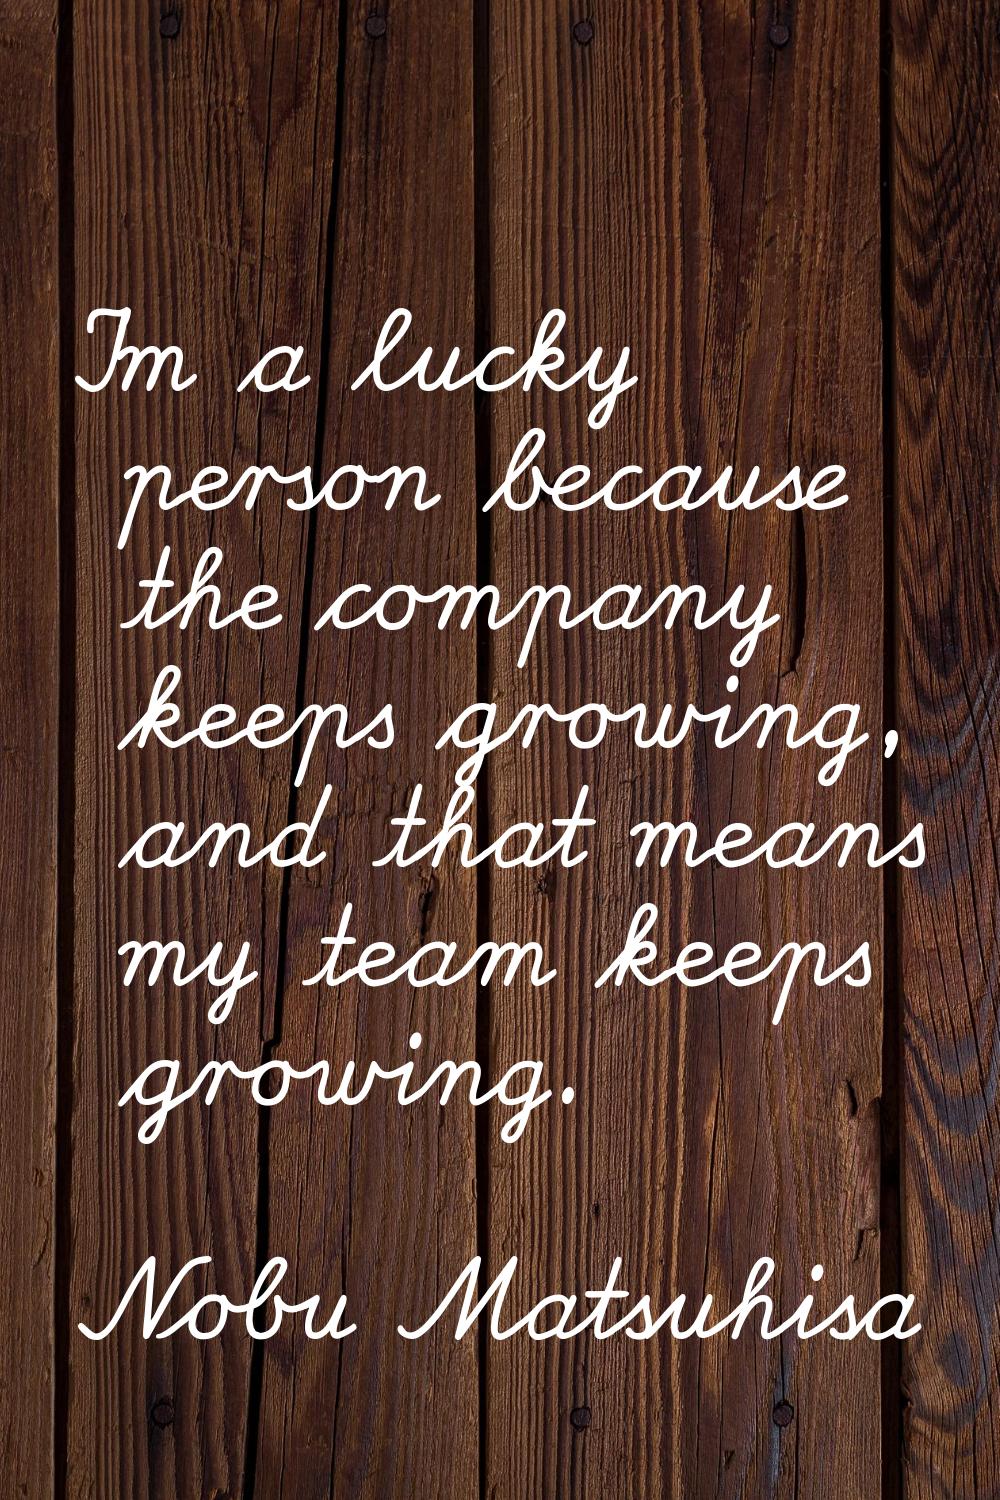 I'm a lucky person because the company keeps growing, and that means my team keeps growing.